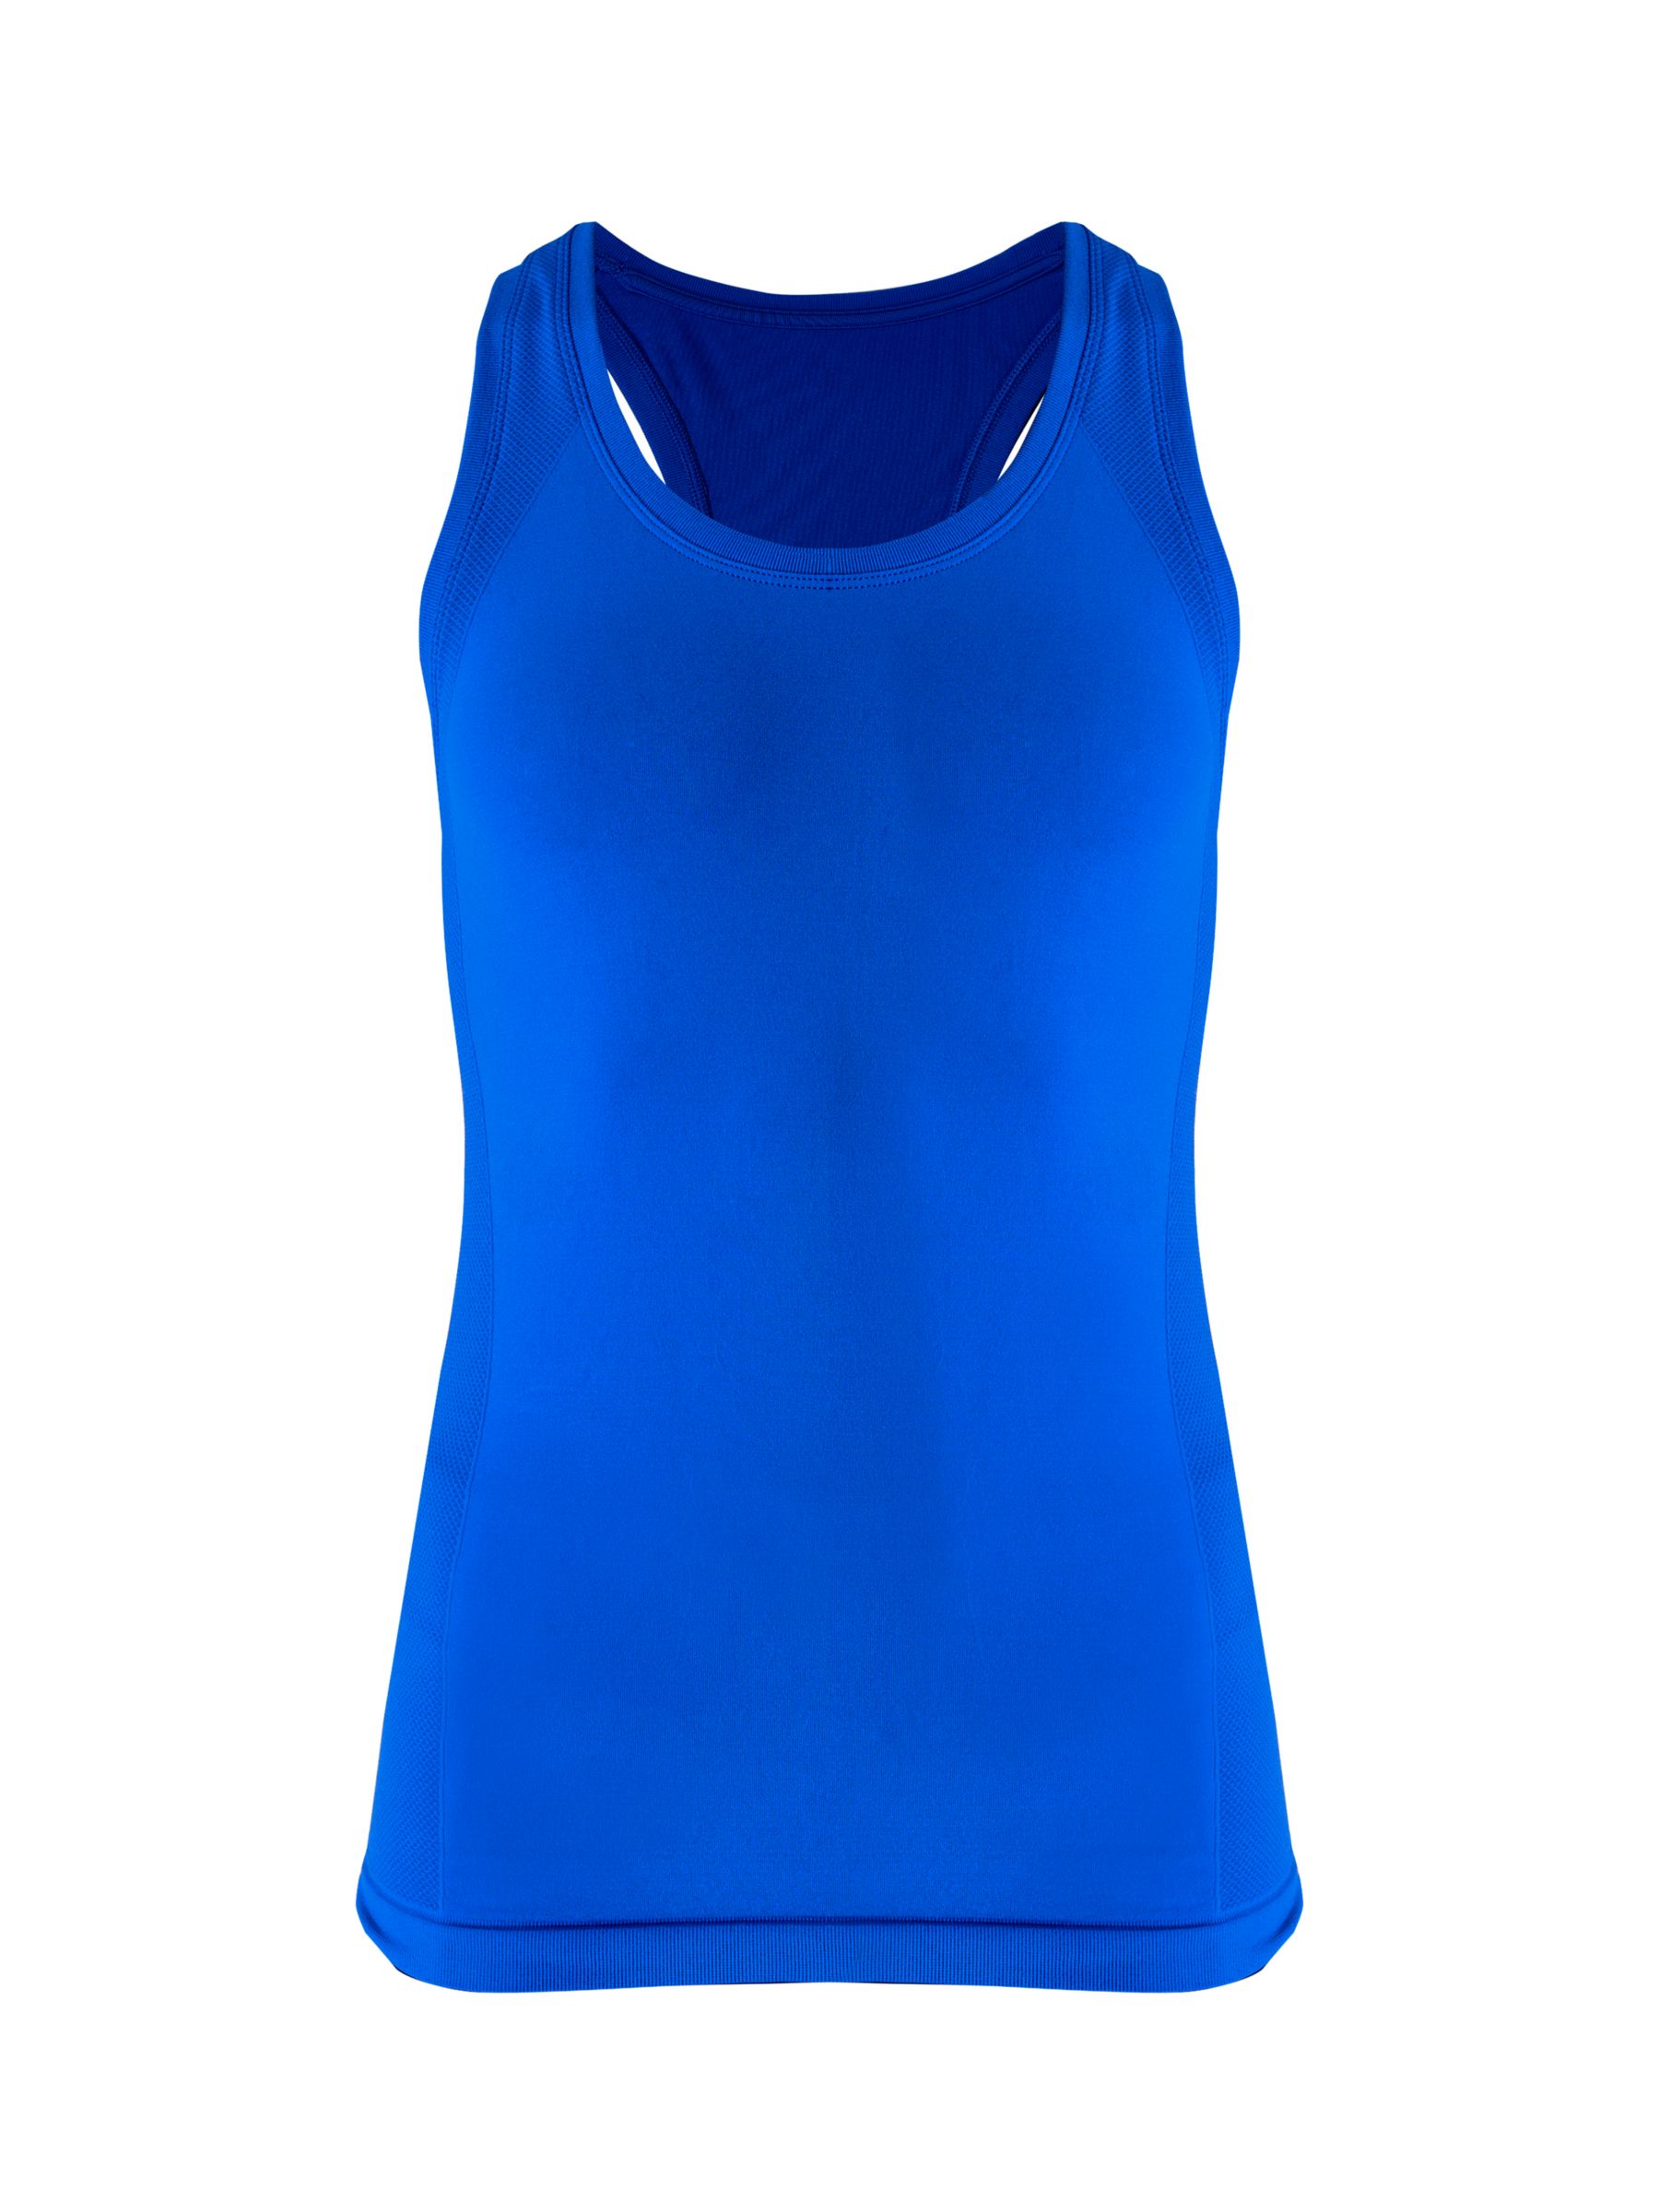 Buy Sweaty Betty Athlete Seamless Workout Tank Top Online at johnlewis.com